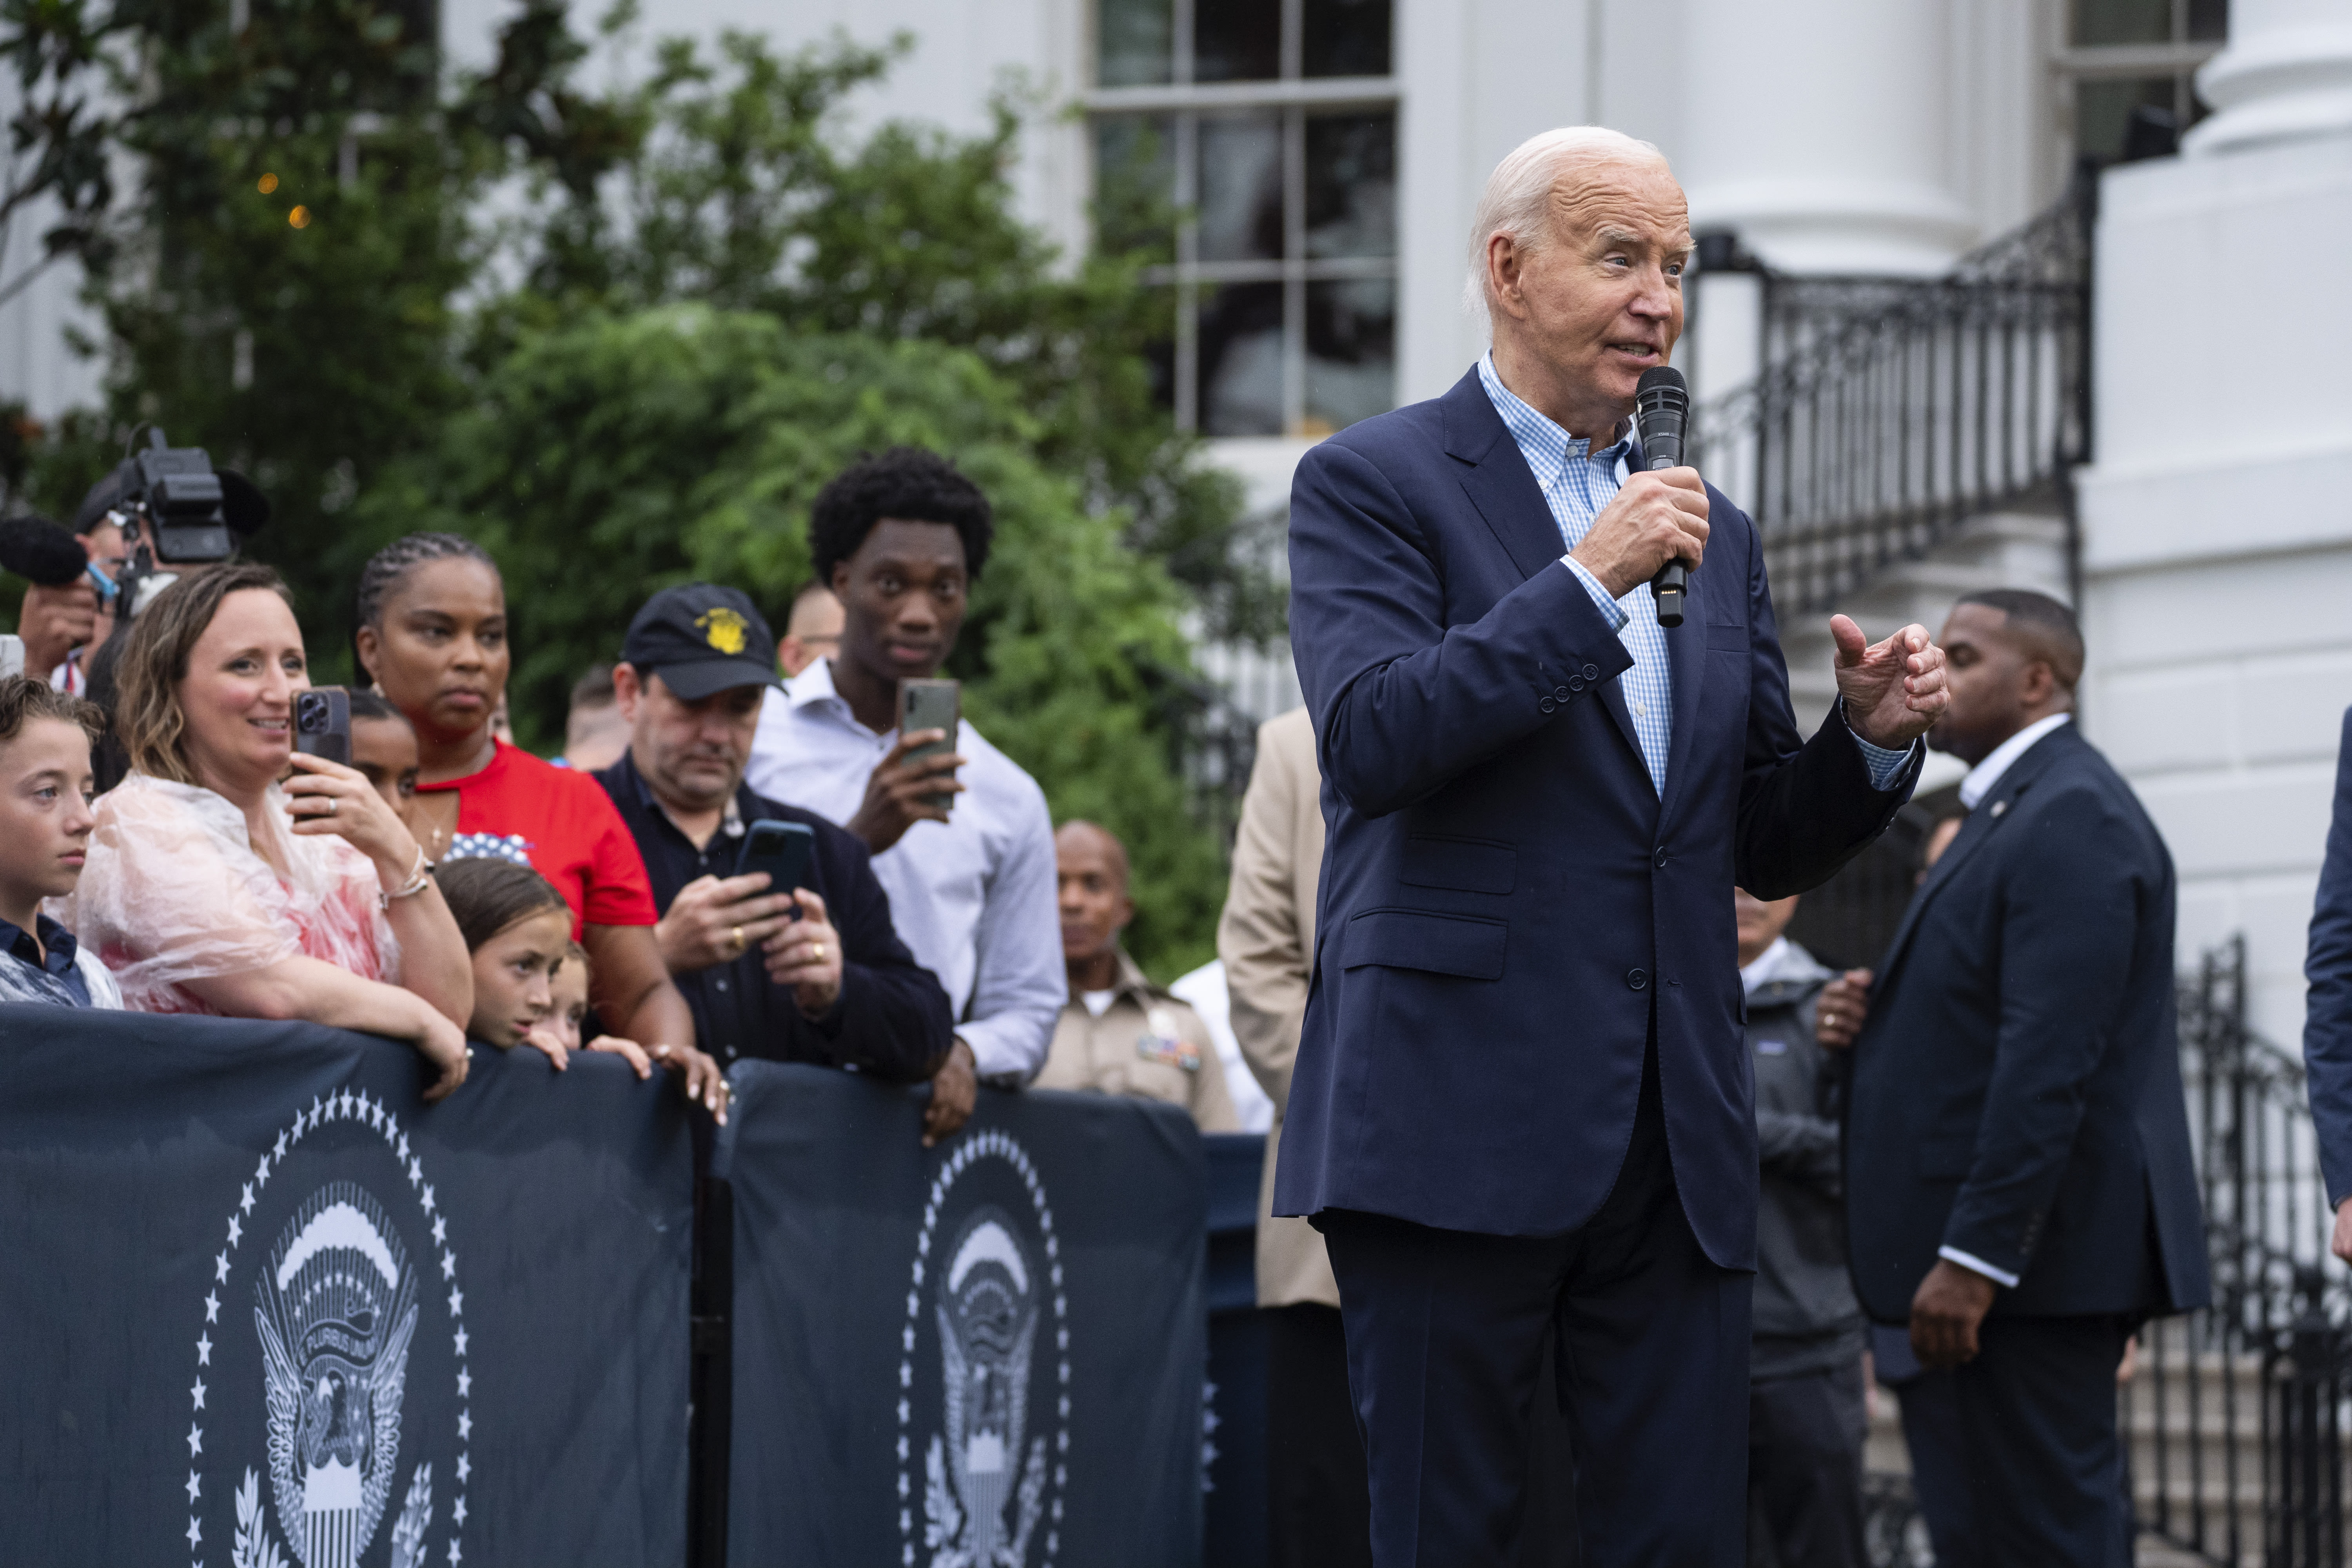 President Biden commemorates Independence Day with military families